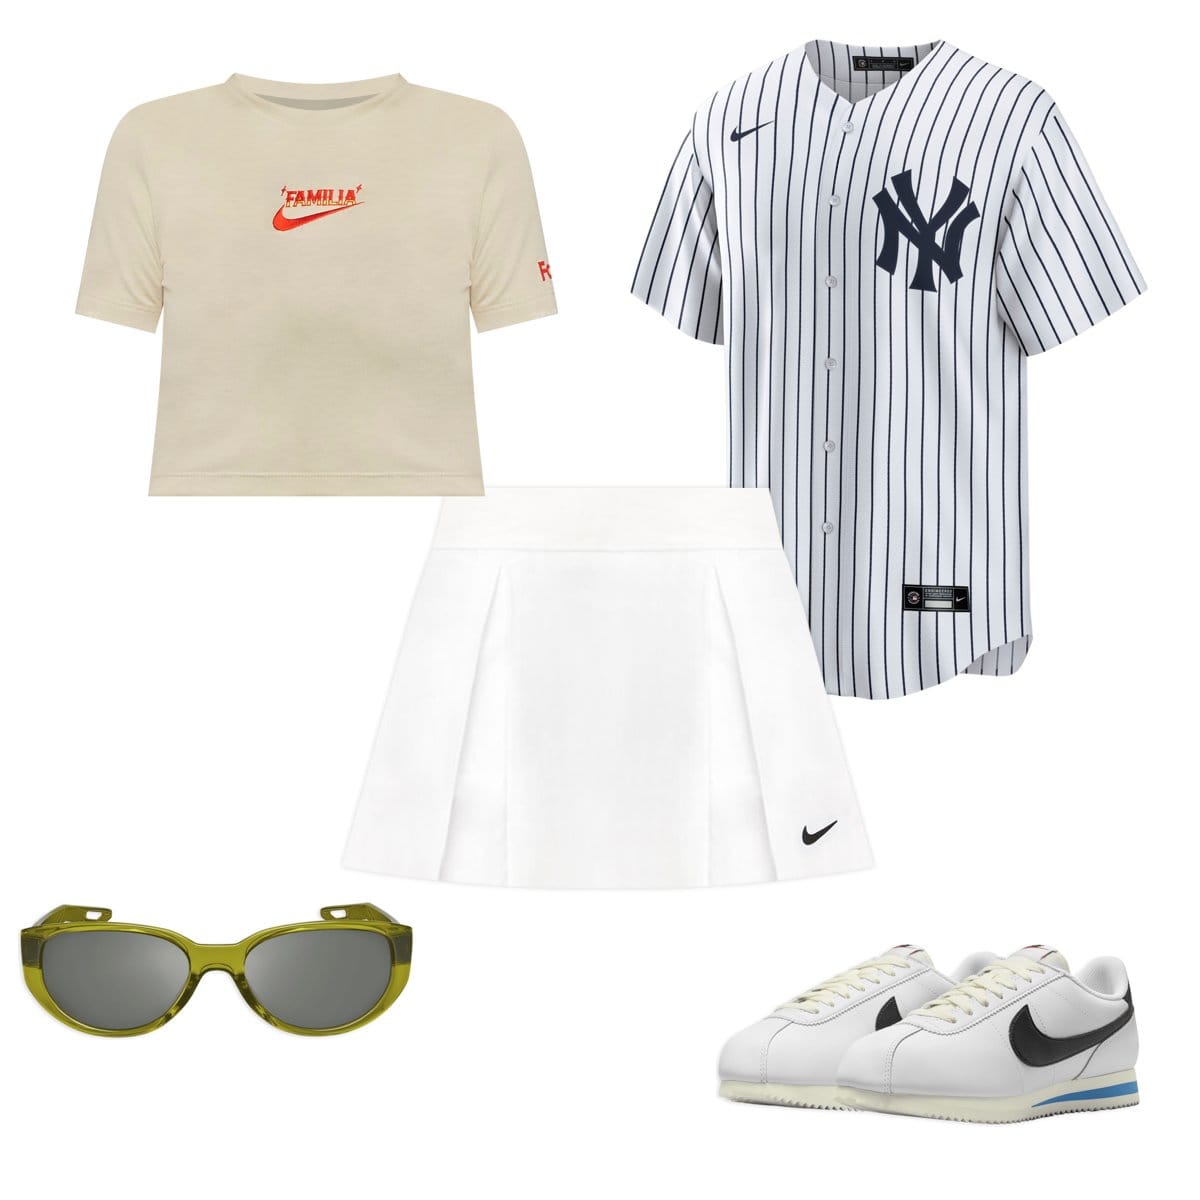 What to Wear to a Baseball Game: 5 Outfit Ideas You're Sure to